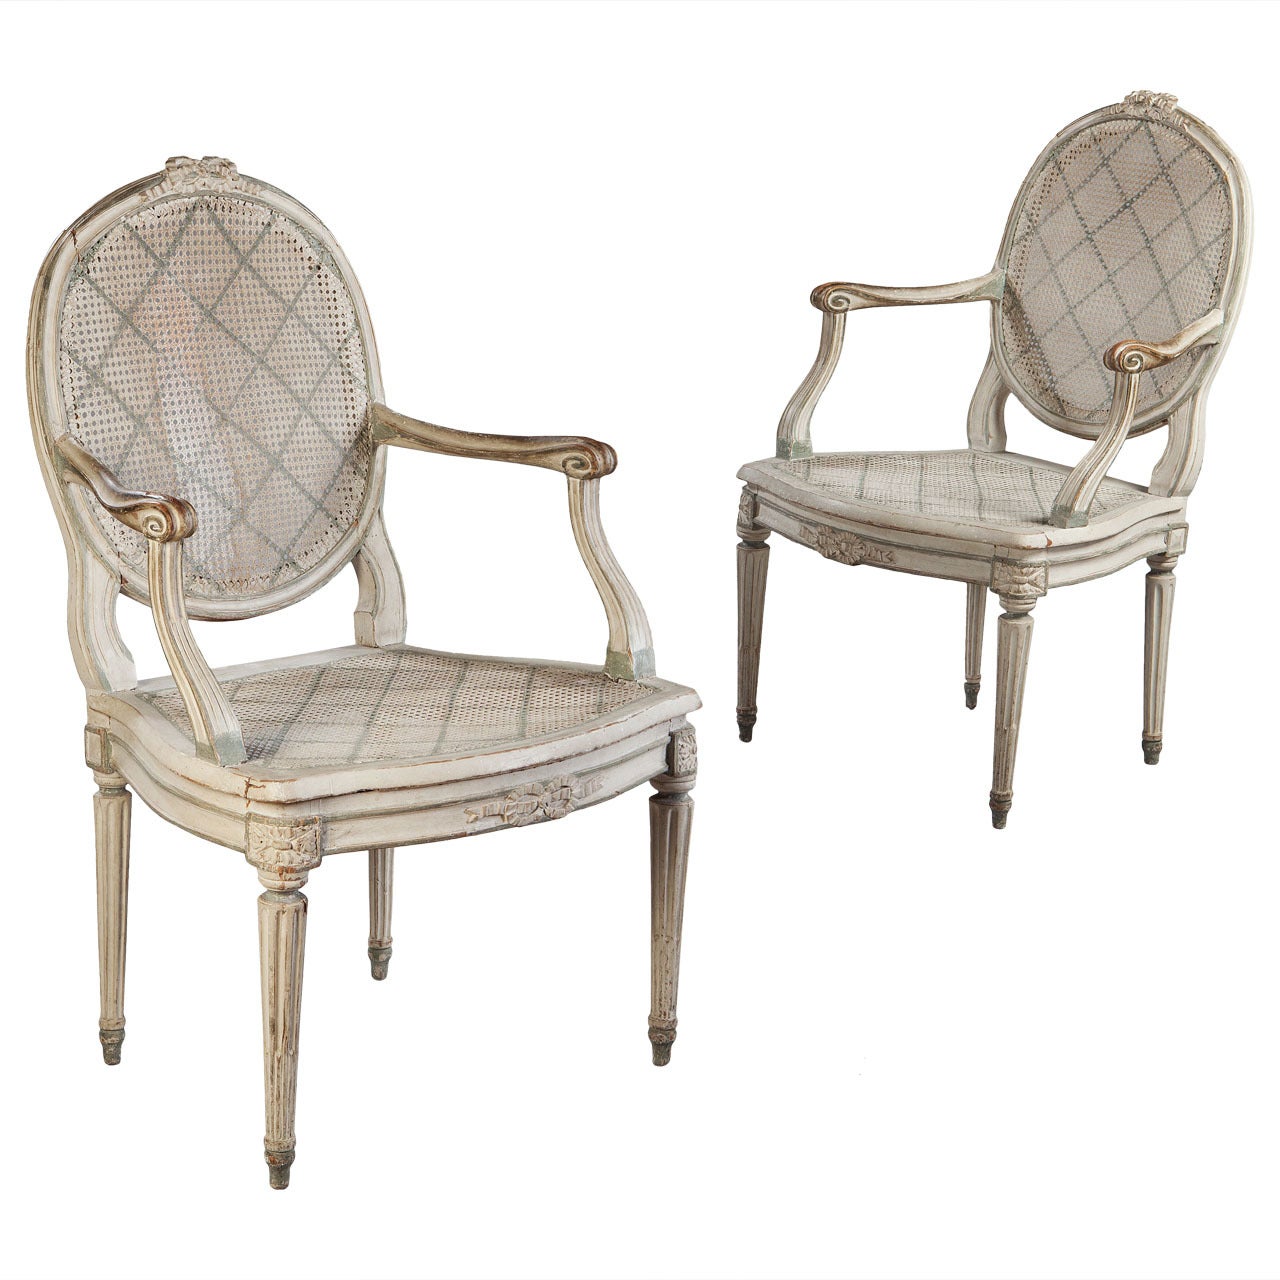 Fine Pair of 18th Century Caned Chairs